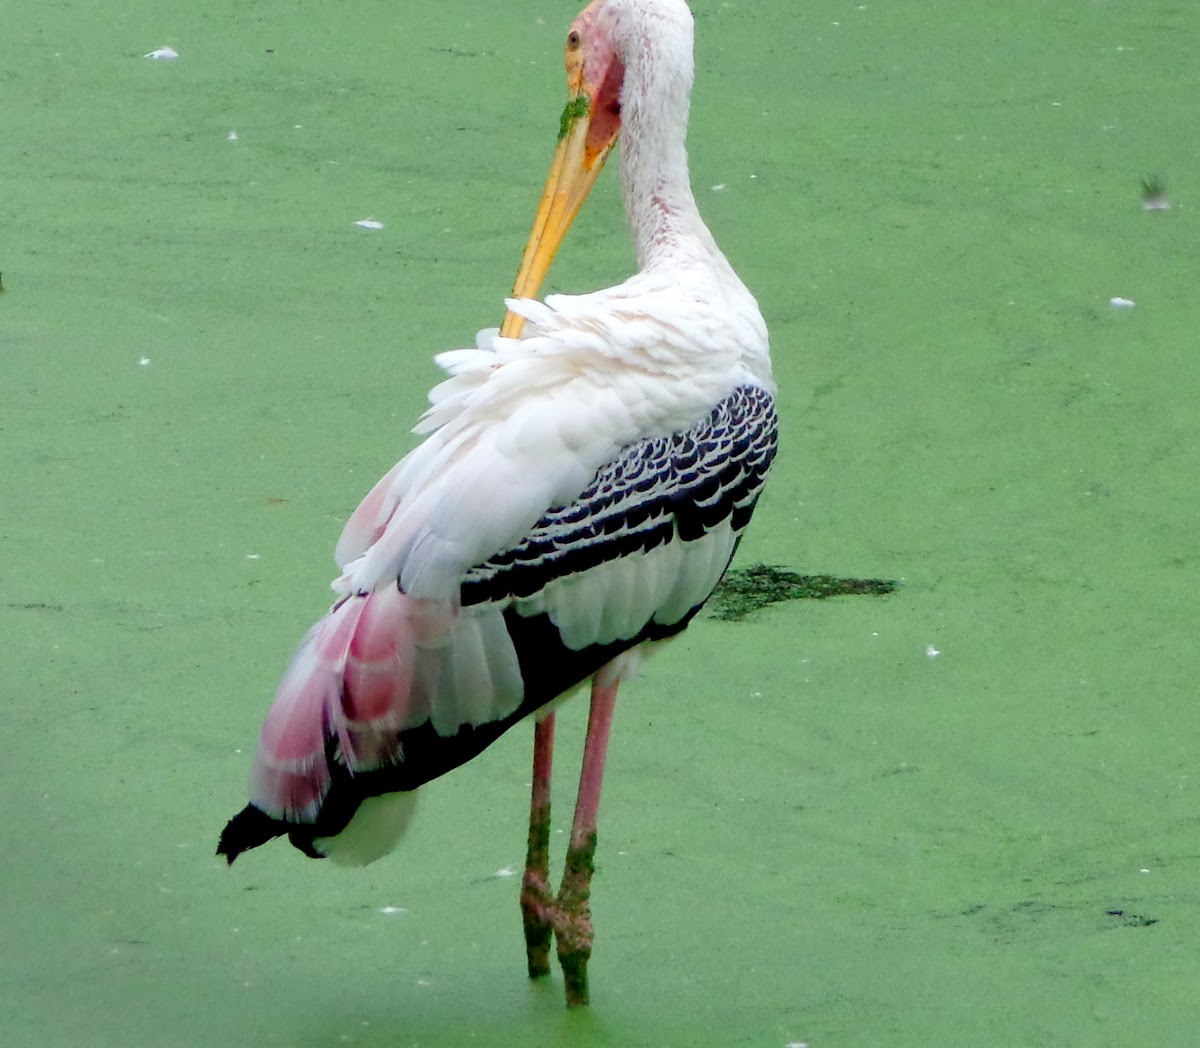 The Painted Stork